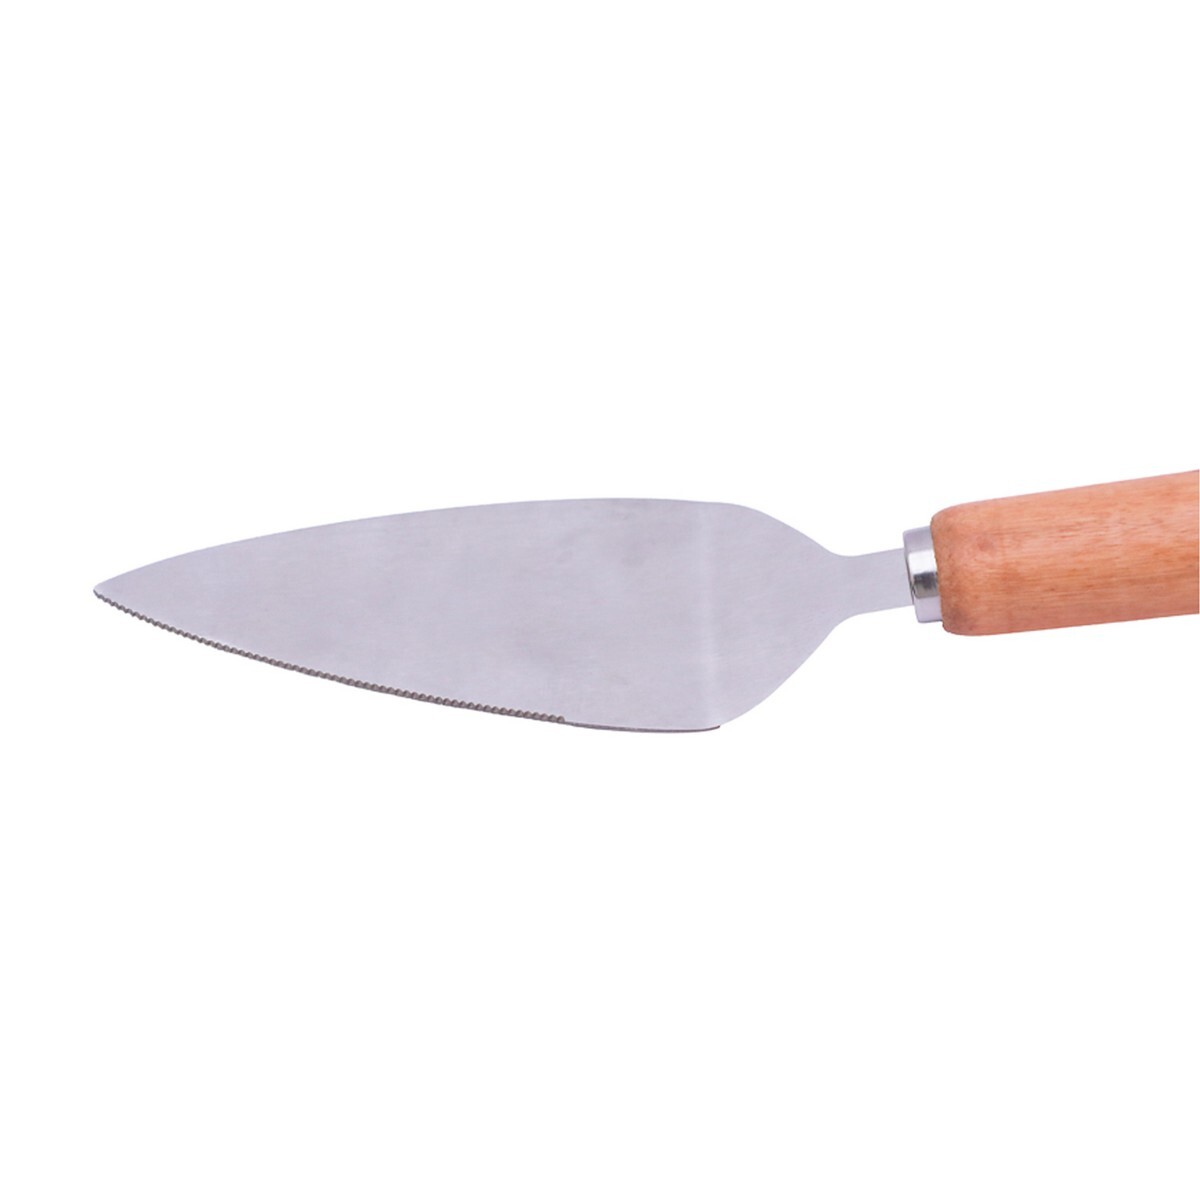 Home Pizza Knife 16014-7